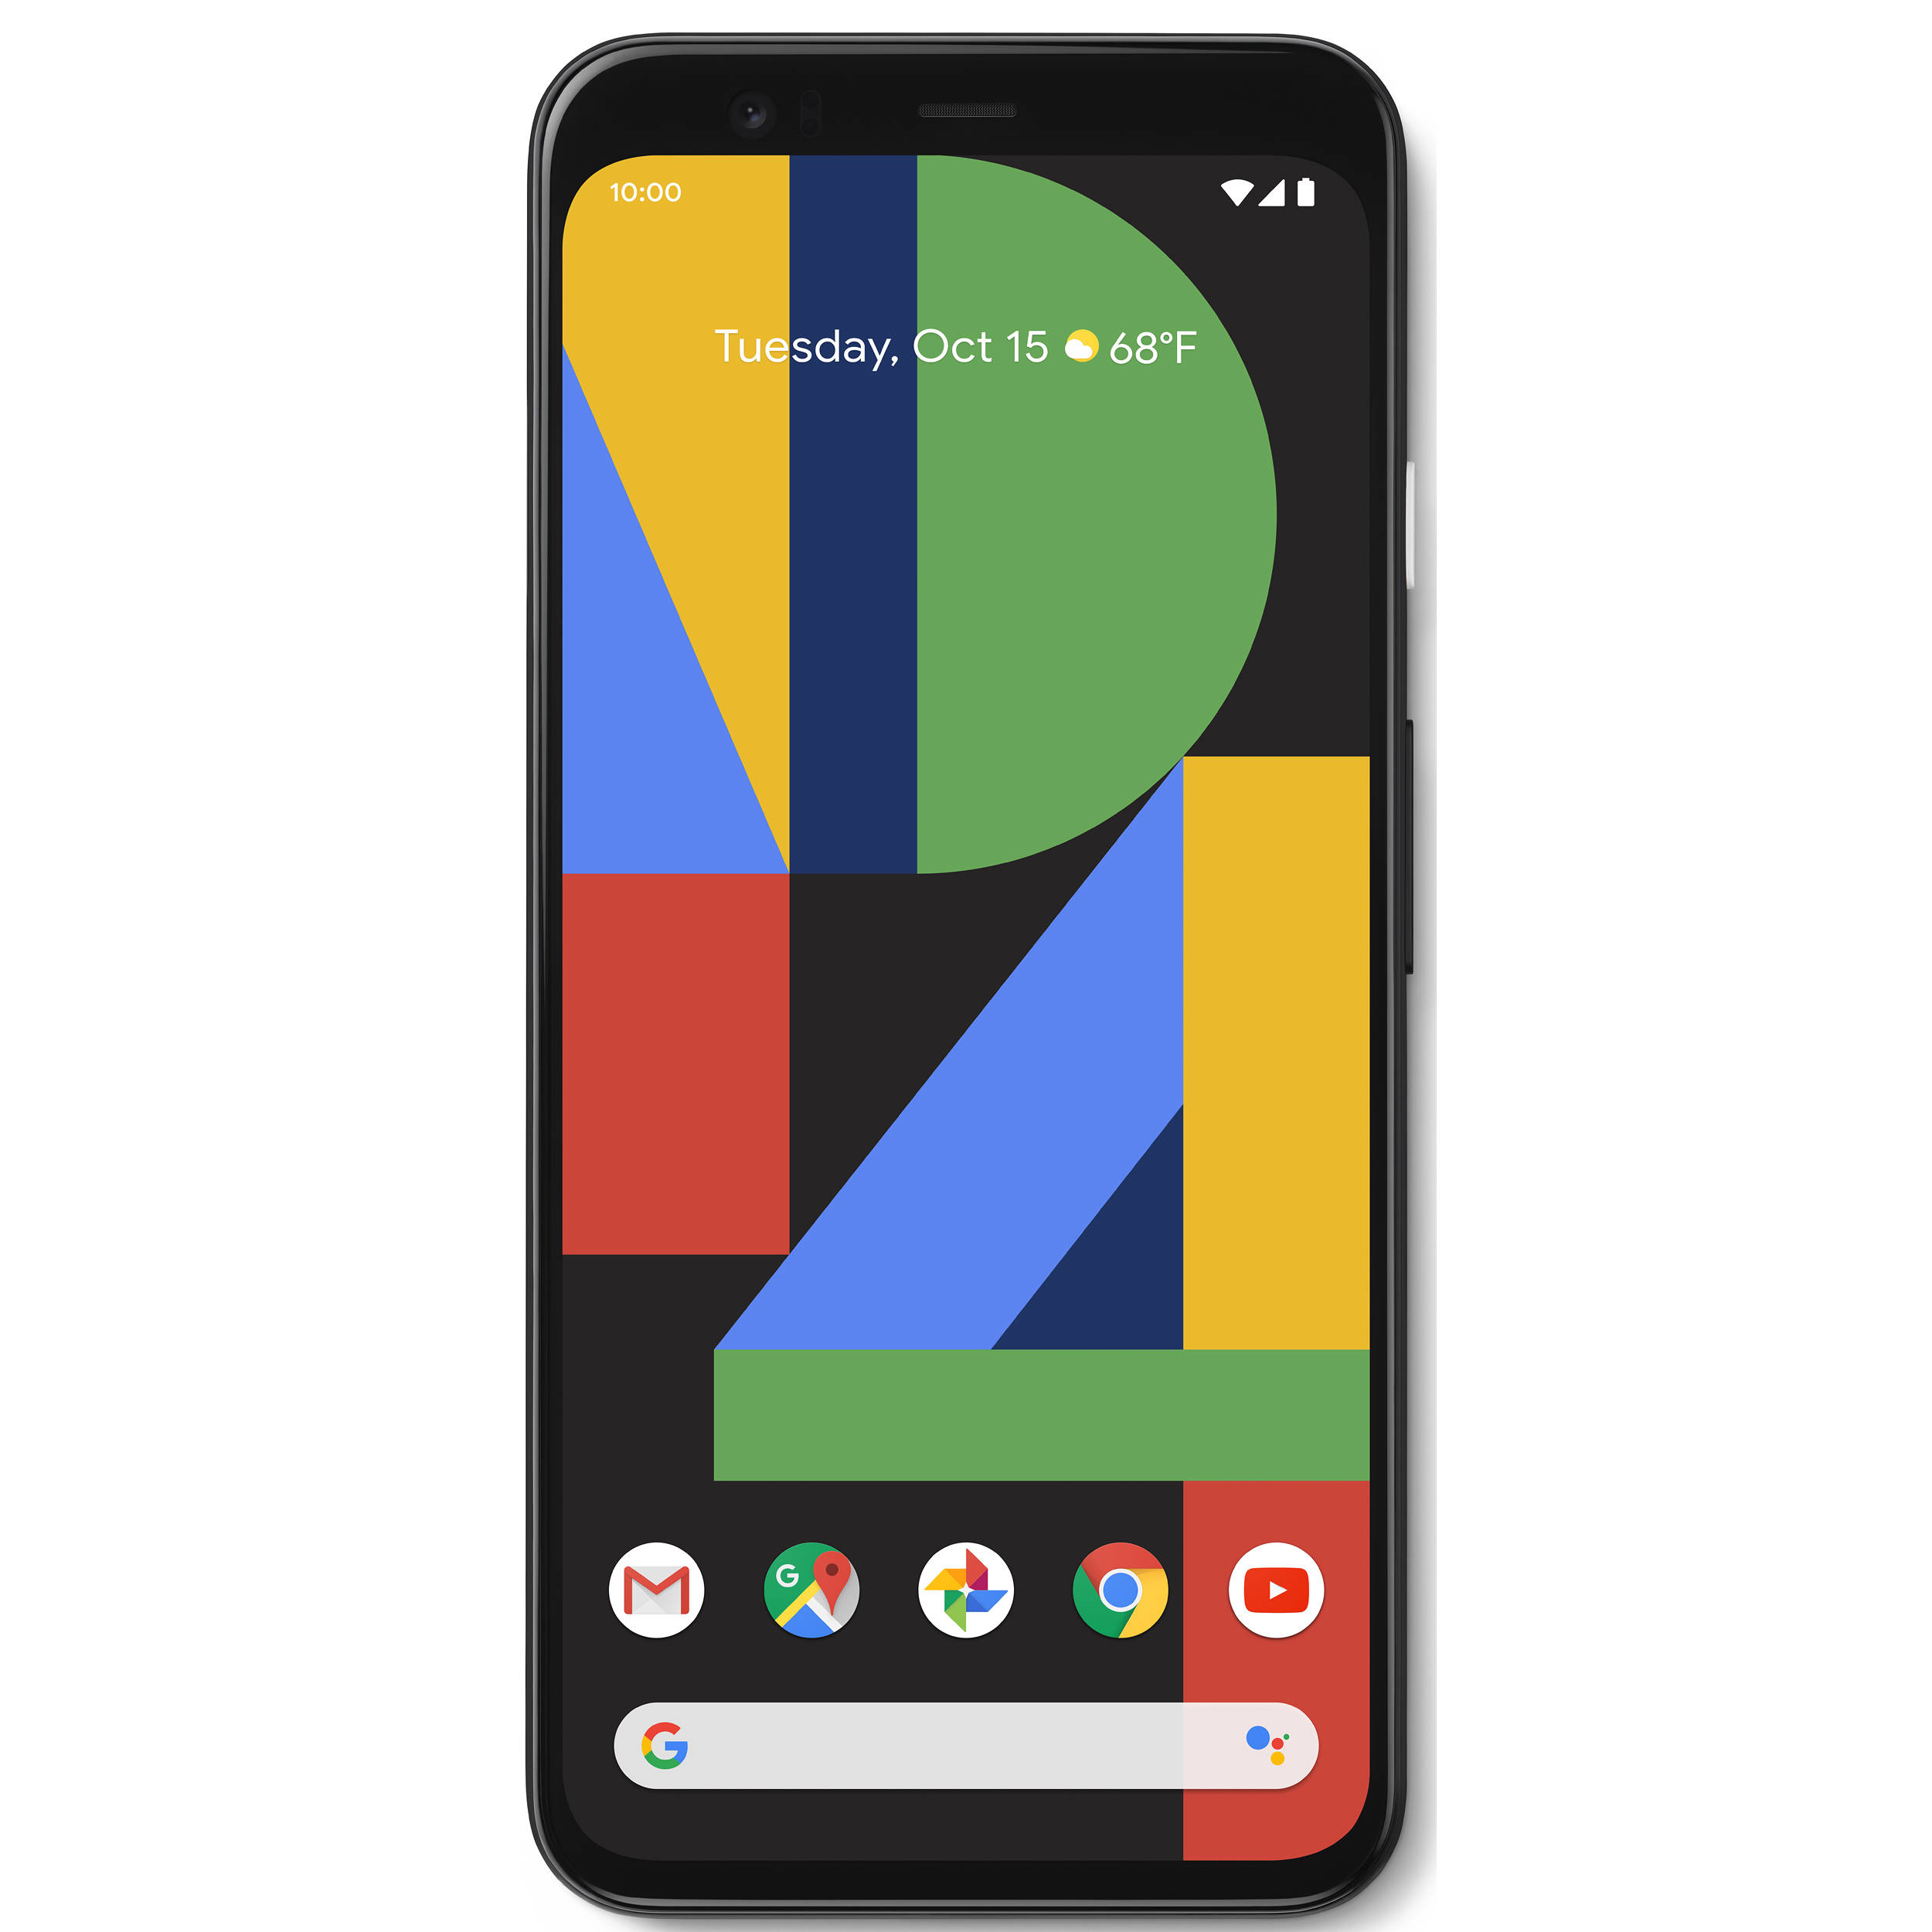 Managing Open Apps On Google Pixel 4: A Quick Guide